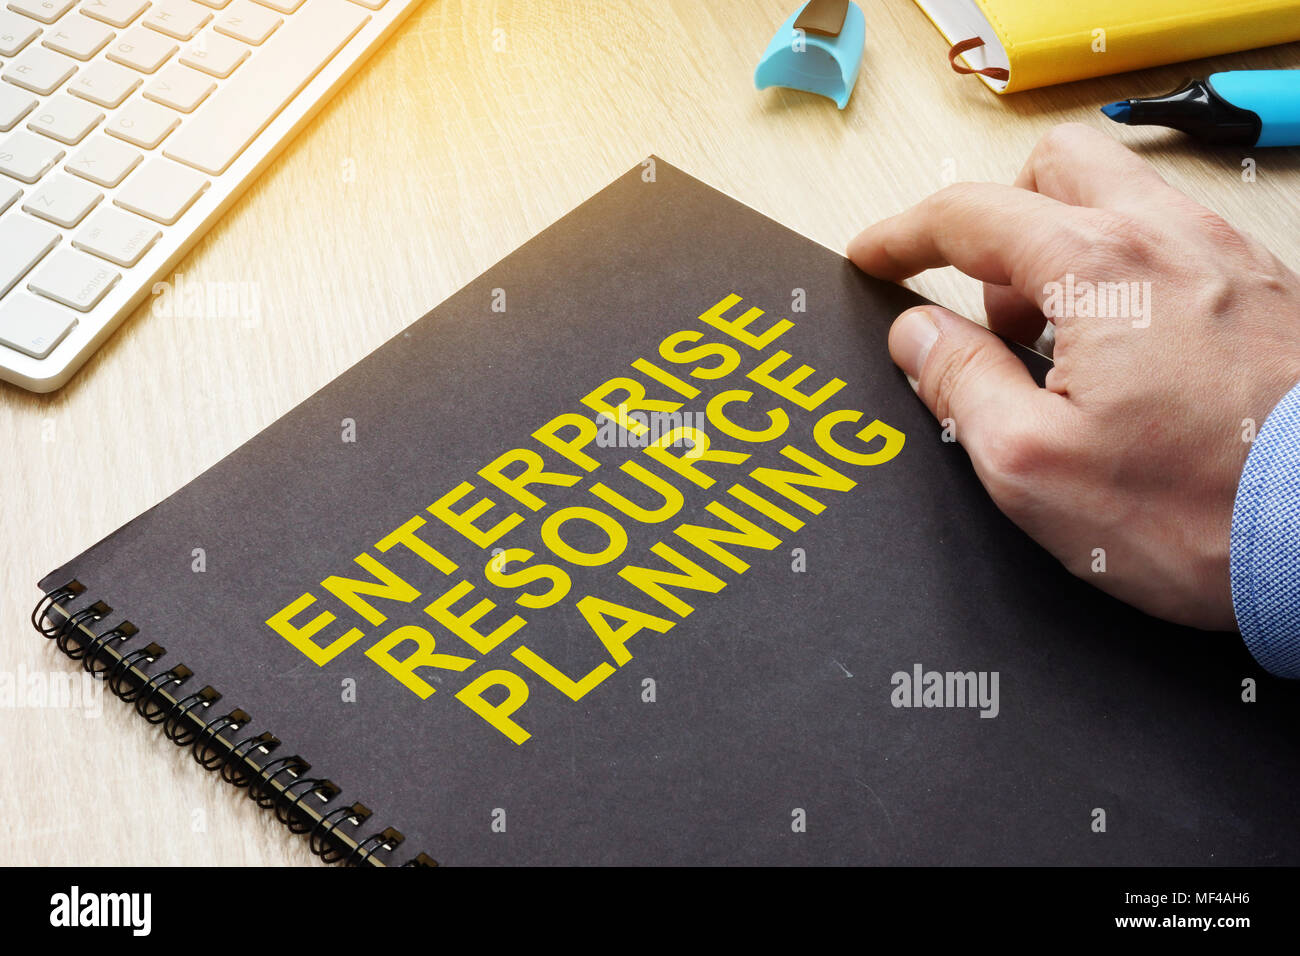 ERP Enterprise Resource Planning book on a table. Stock Photo